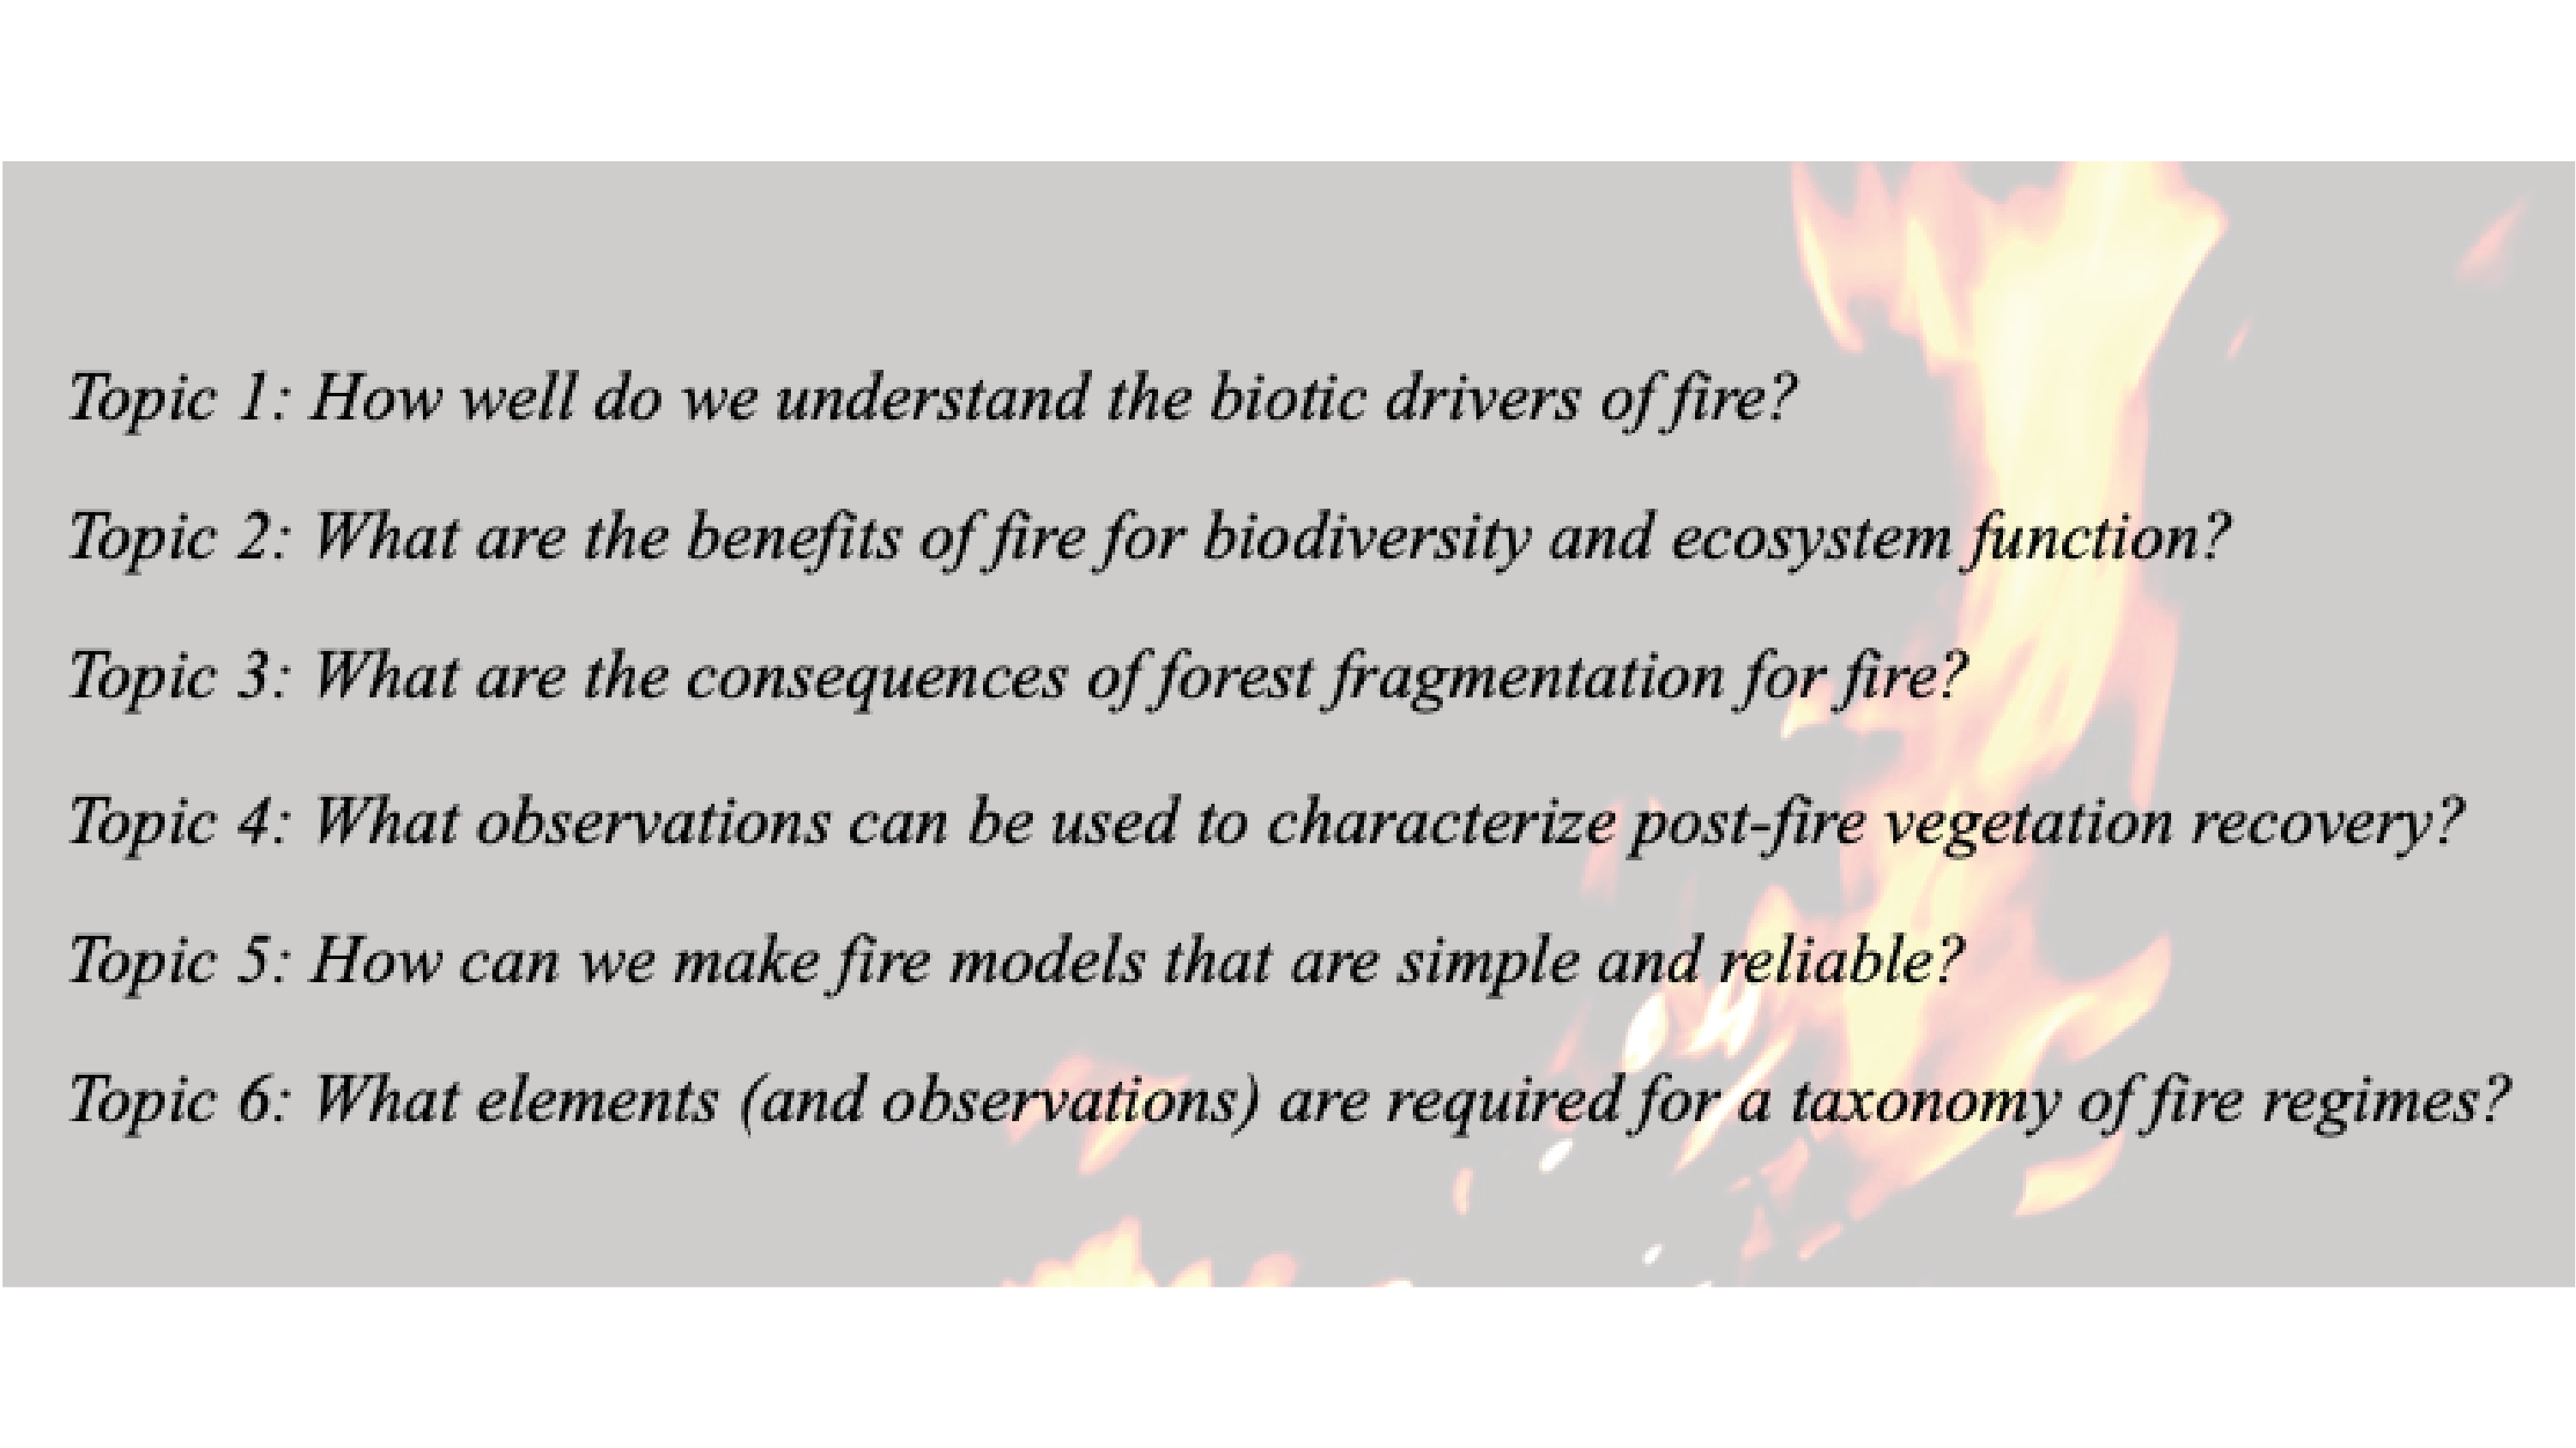 Workshop of New Directions in Fire Ecology and Fire Modelling by Yicheng Shen